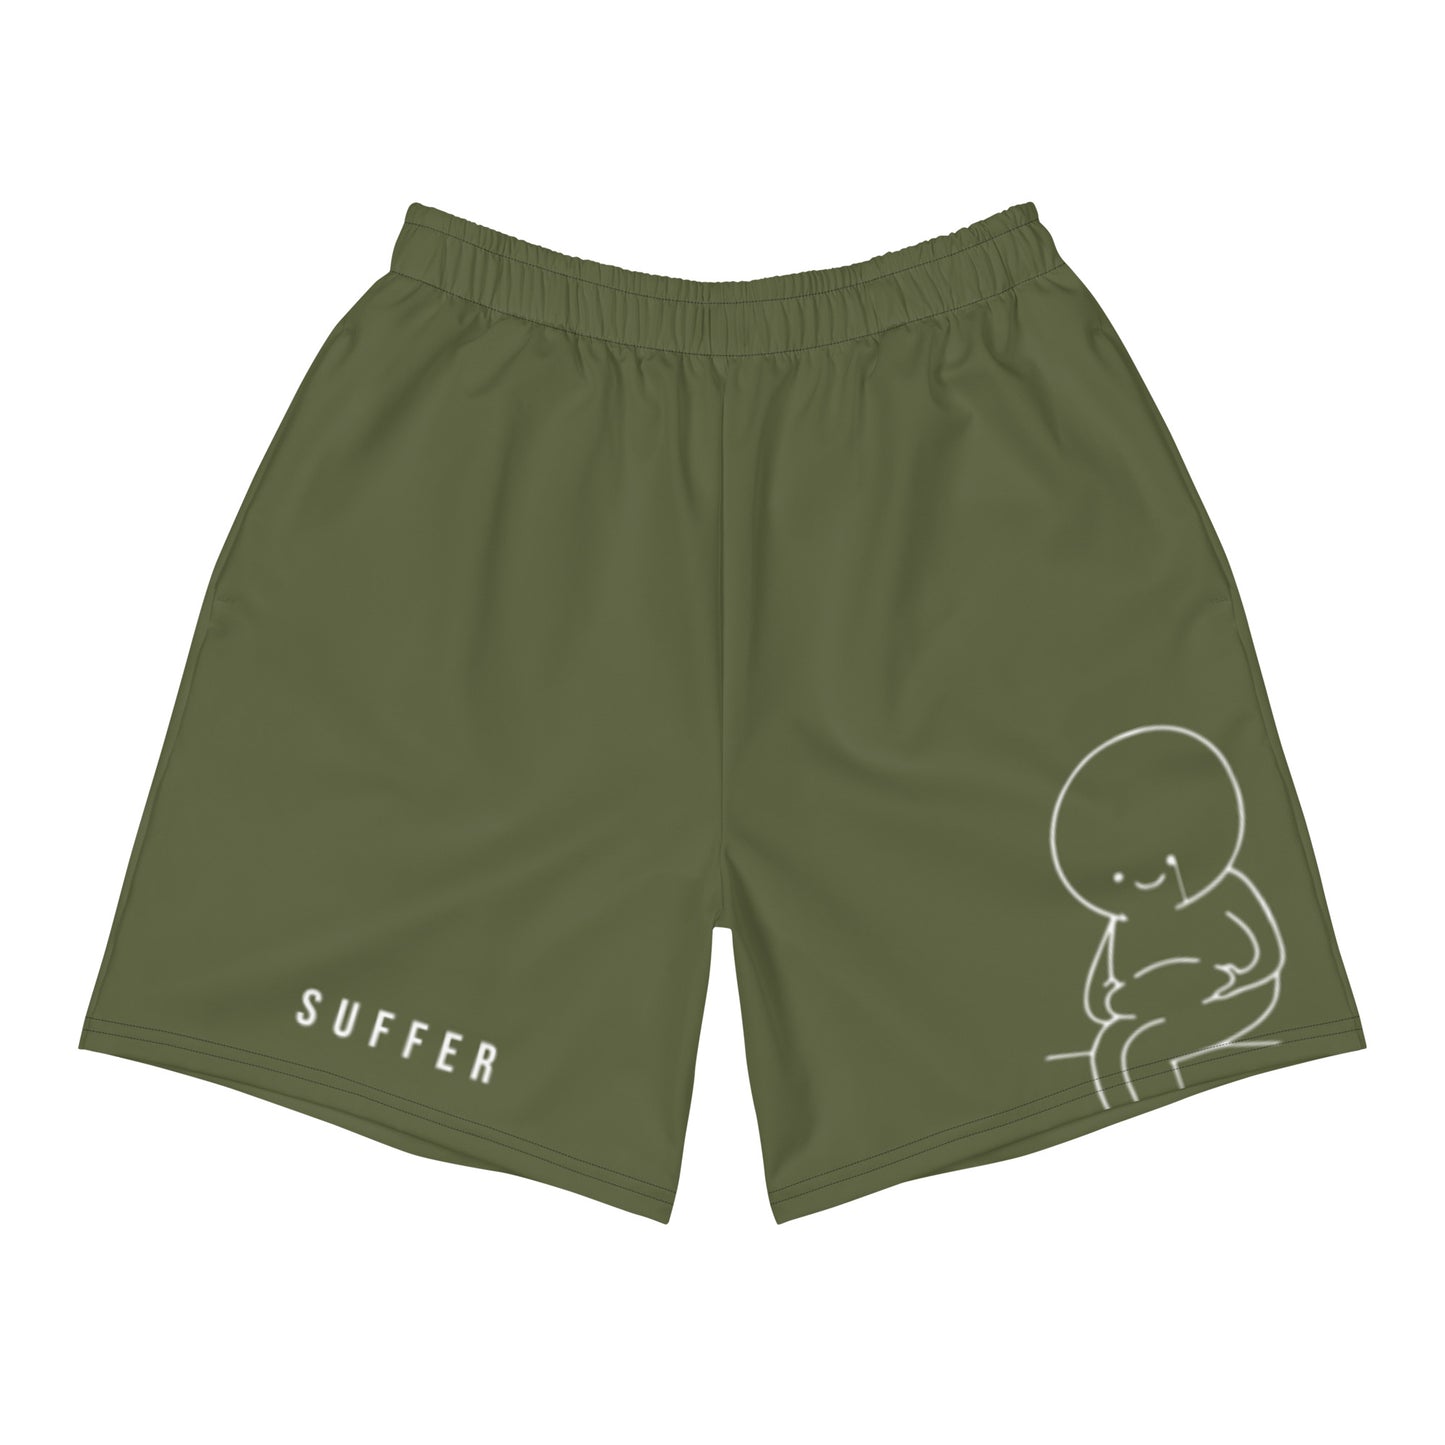 Olive SUFFER Mascot Athletic Shorts